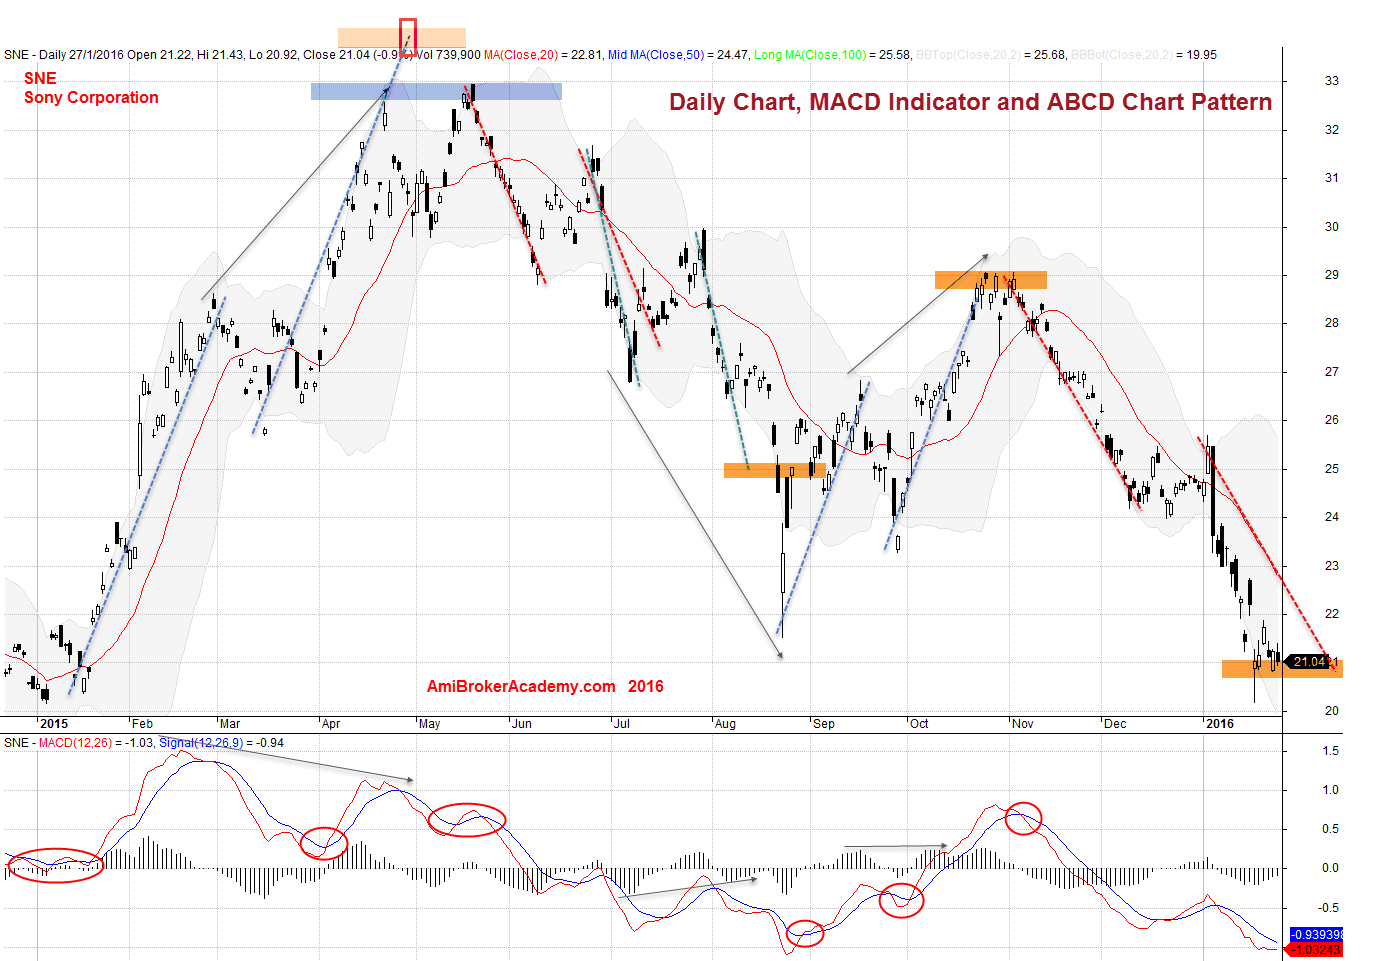 November 3, 2016 SNE Sony Corporation Daily, MACD and ABCD Chart Pattern